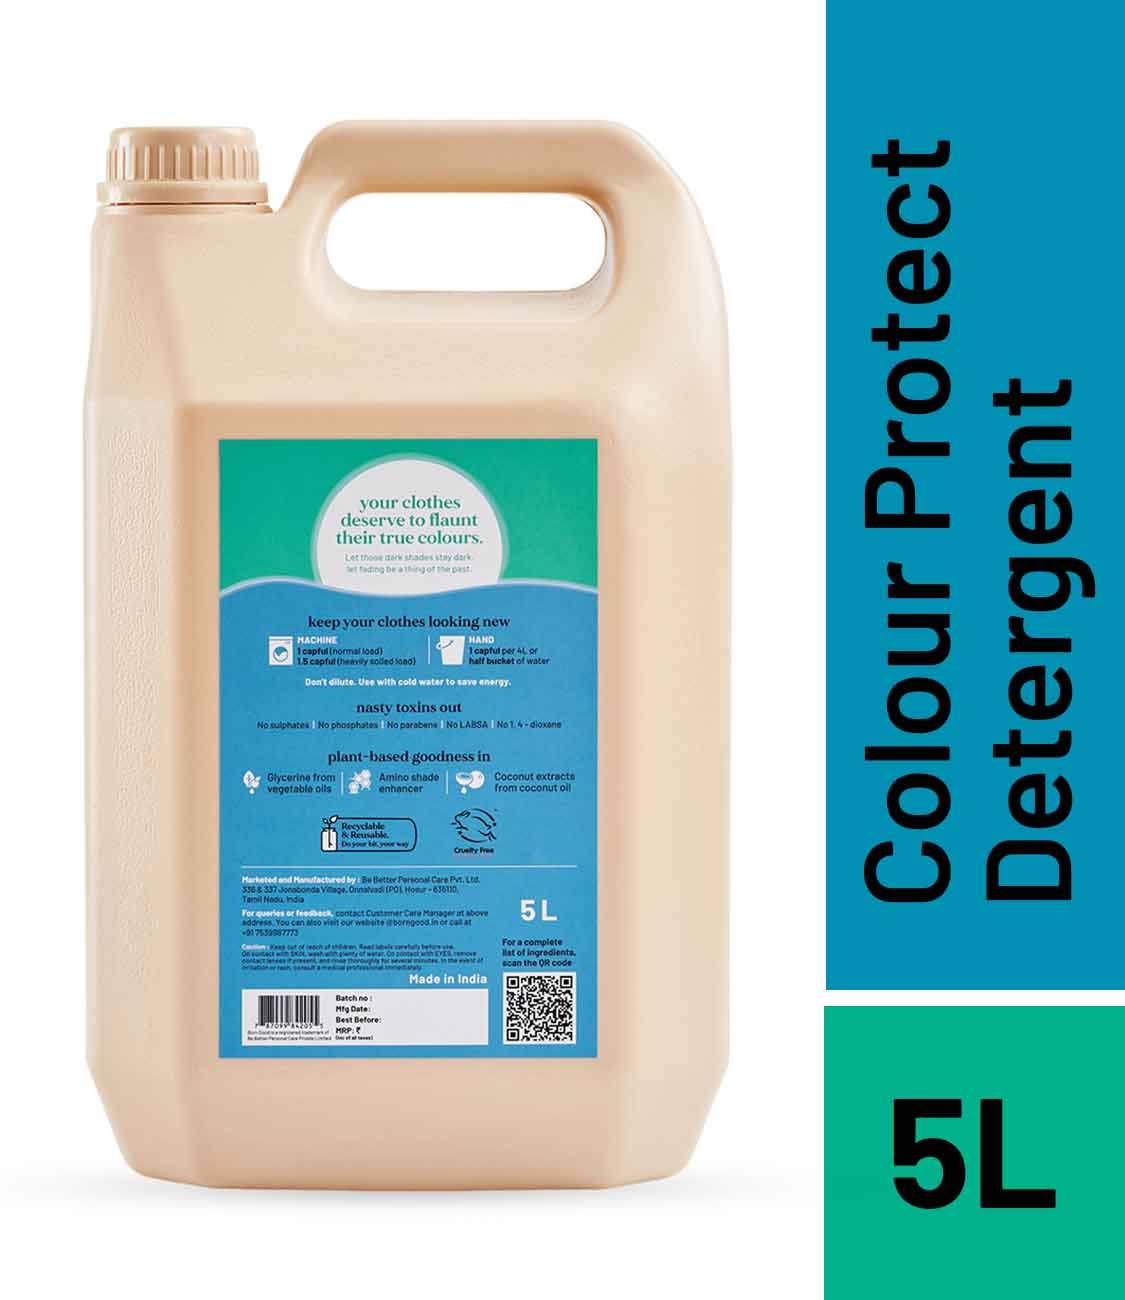 Born Good Plant-based Colour Protect Laundry Detergent - 5 L Can